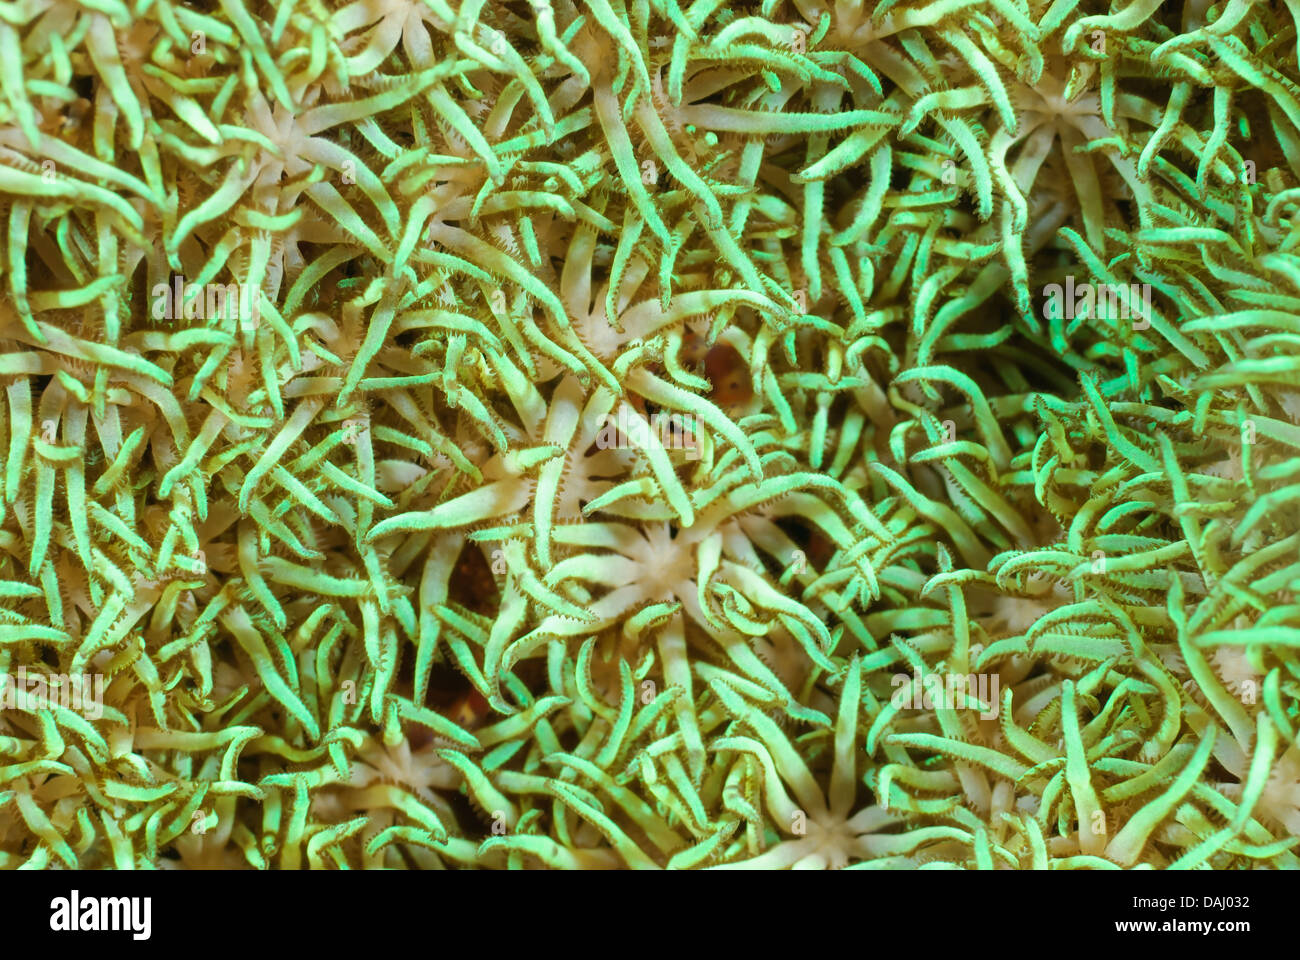 polyps of a tube coral, possibly Tubipora musica, or organ pipe coral, Lembeh Strait, Sulawesi, Indonesia Stock Photo